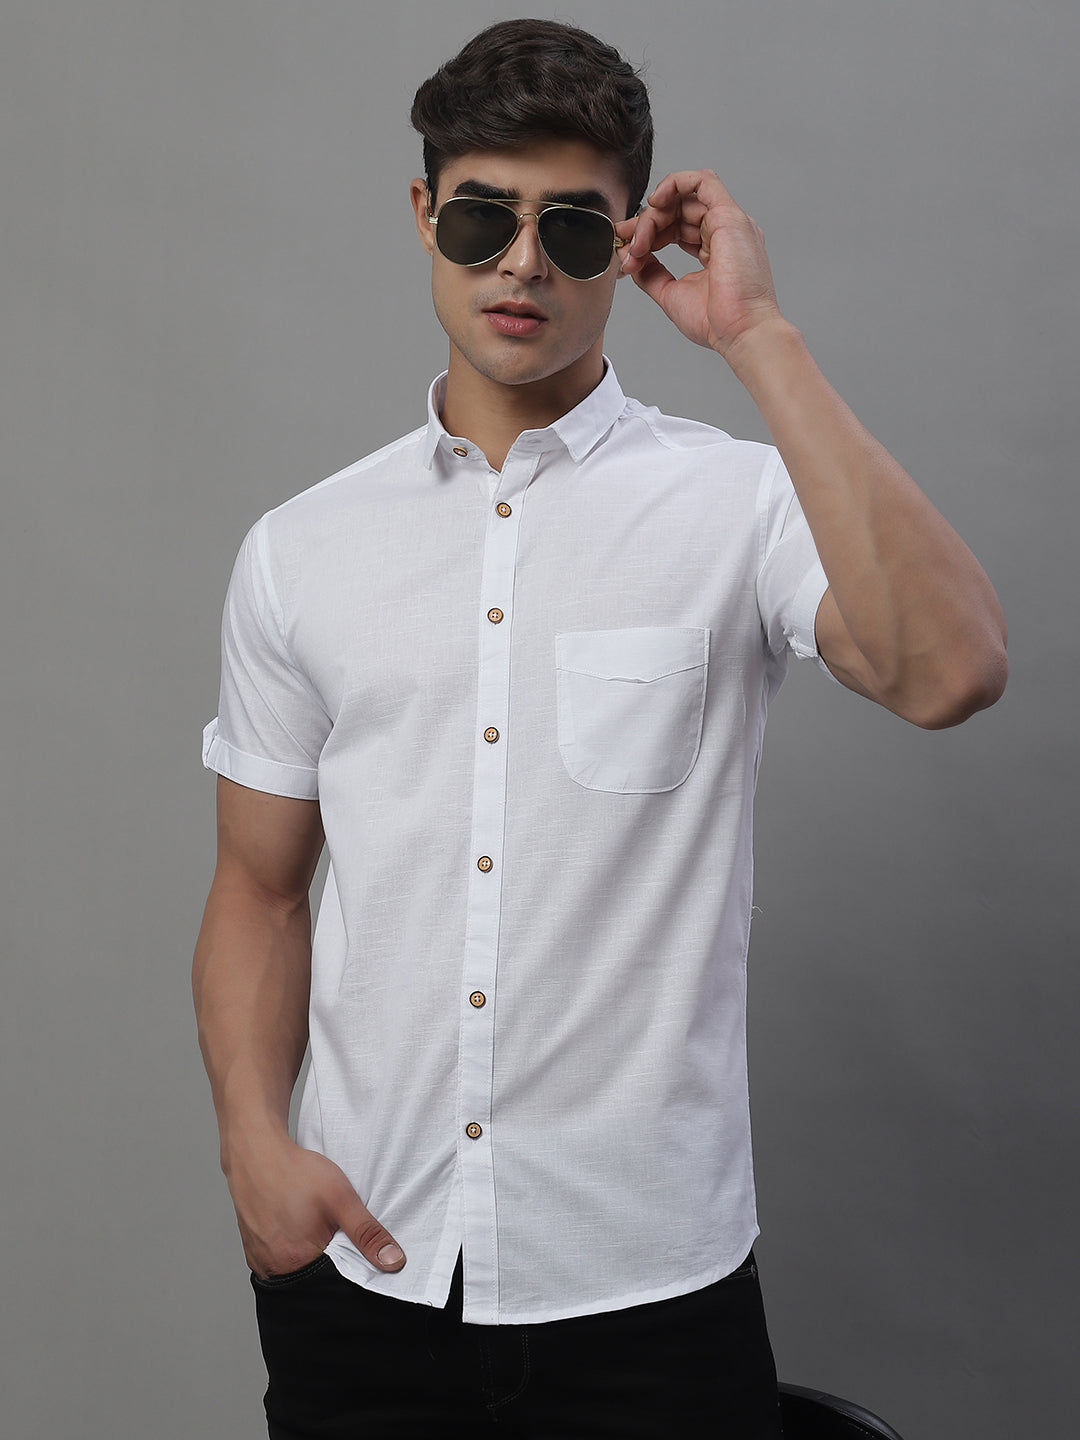 Kicky Pure Cotton Half sleeves Solid Shirt - White